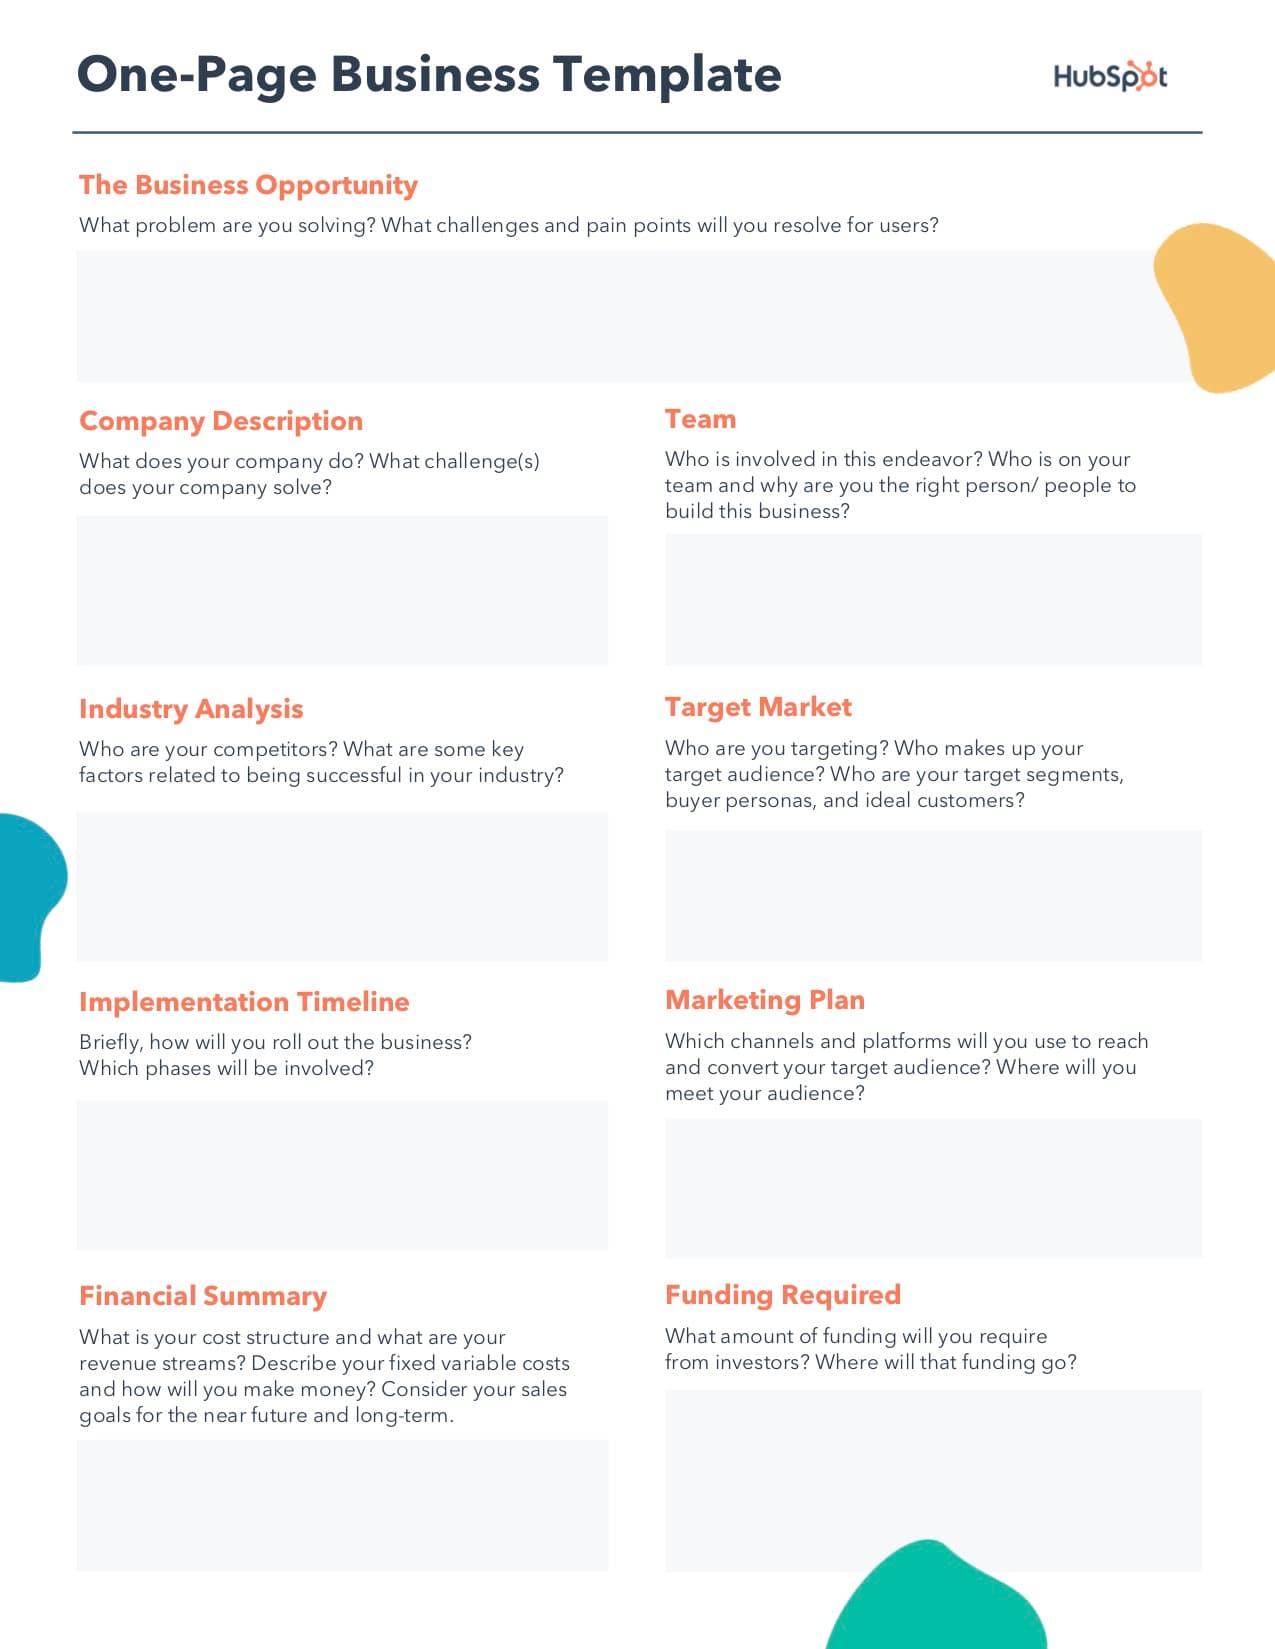 28 Sample Business Plans to Help You Write Your Own